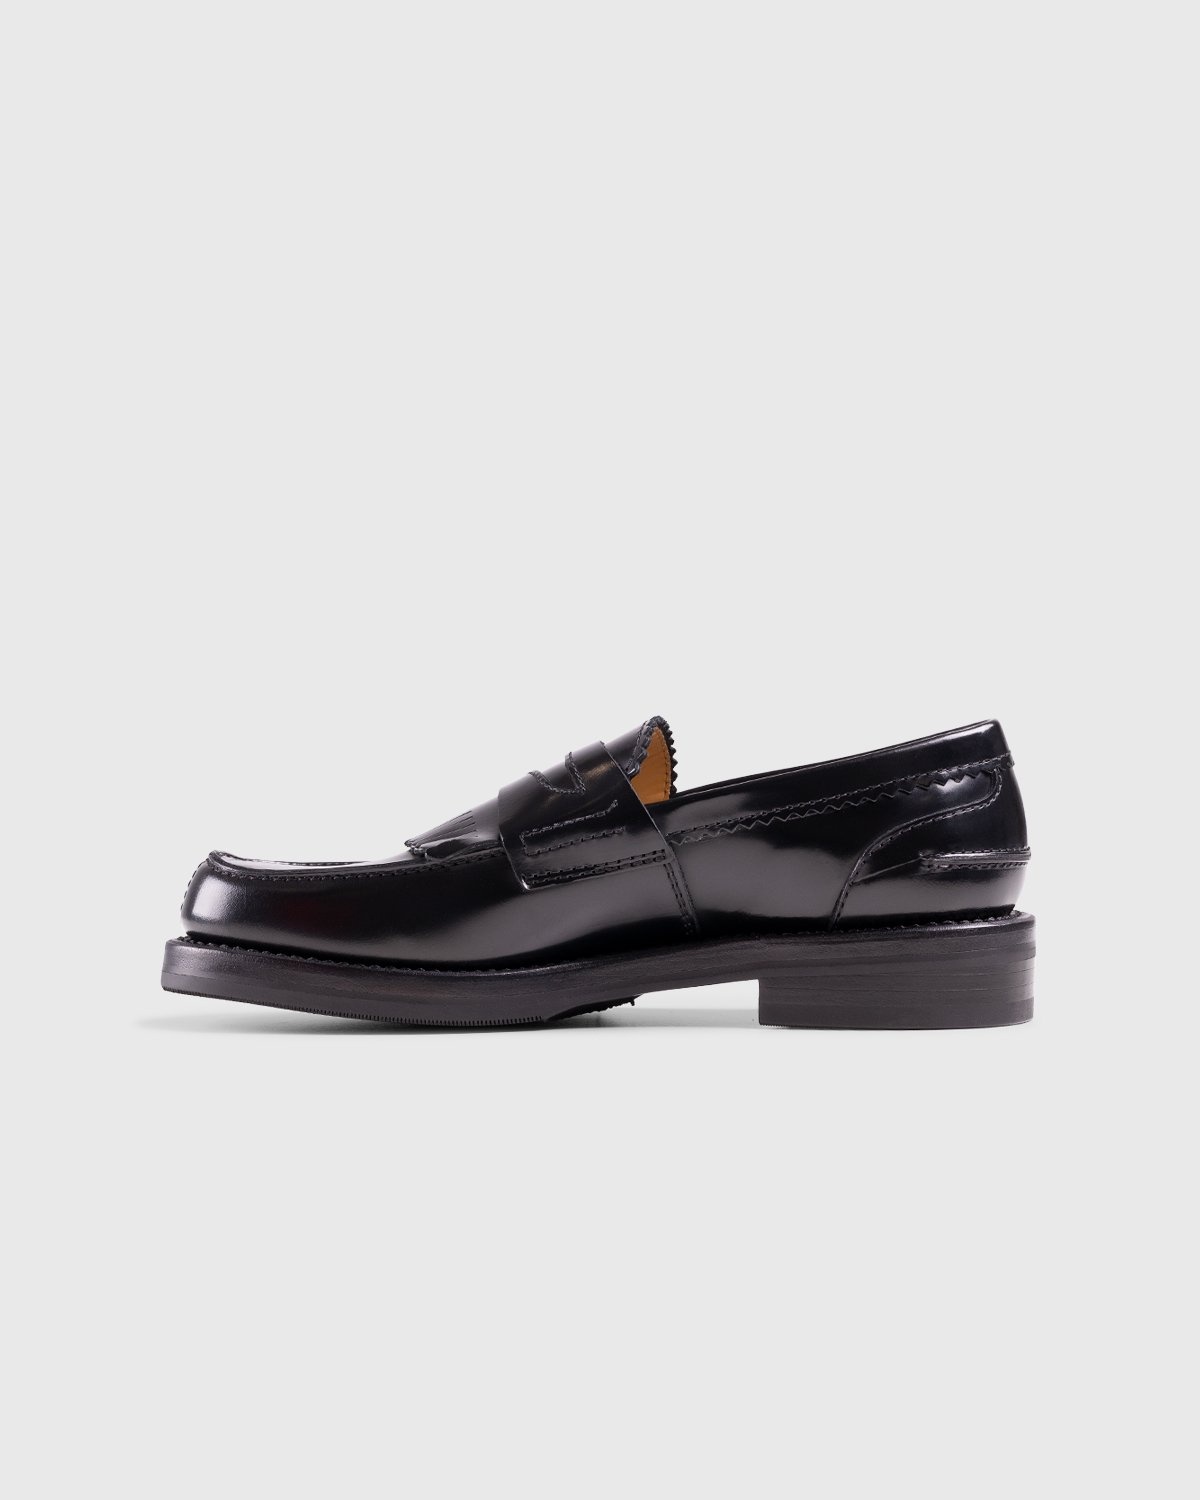 Our Legacy – Penny Loafer Black Leather - Loafers - Black - Image 2